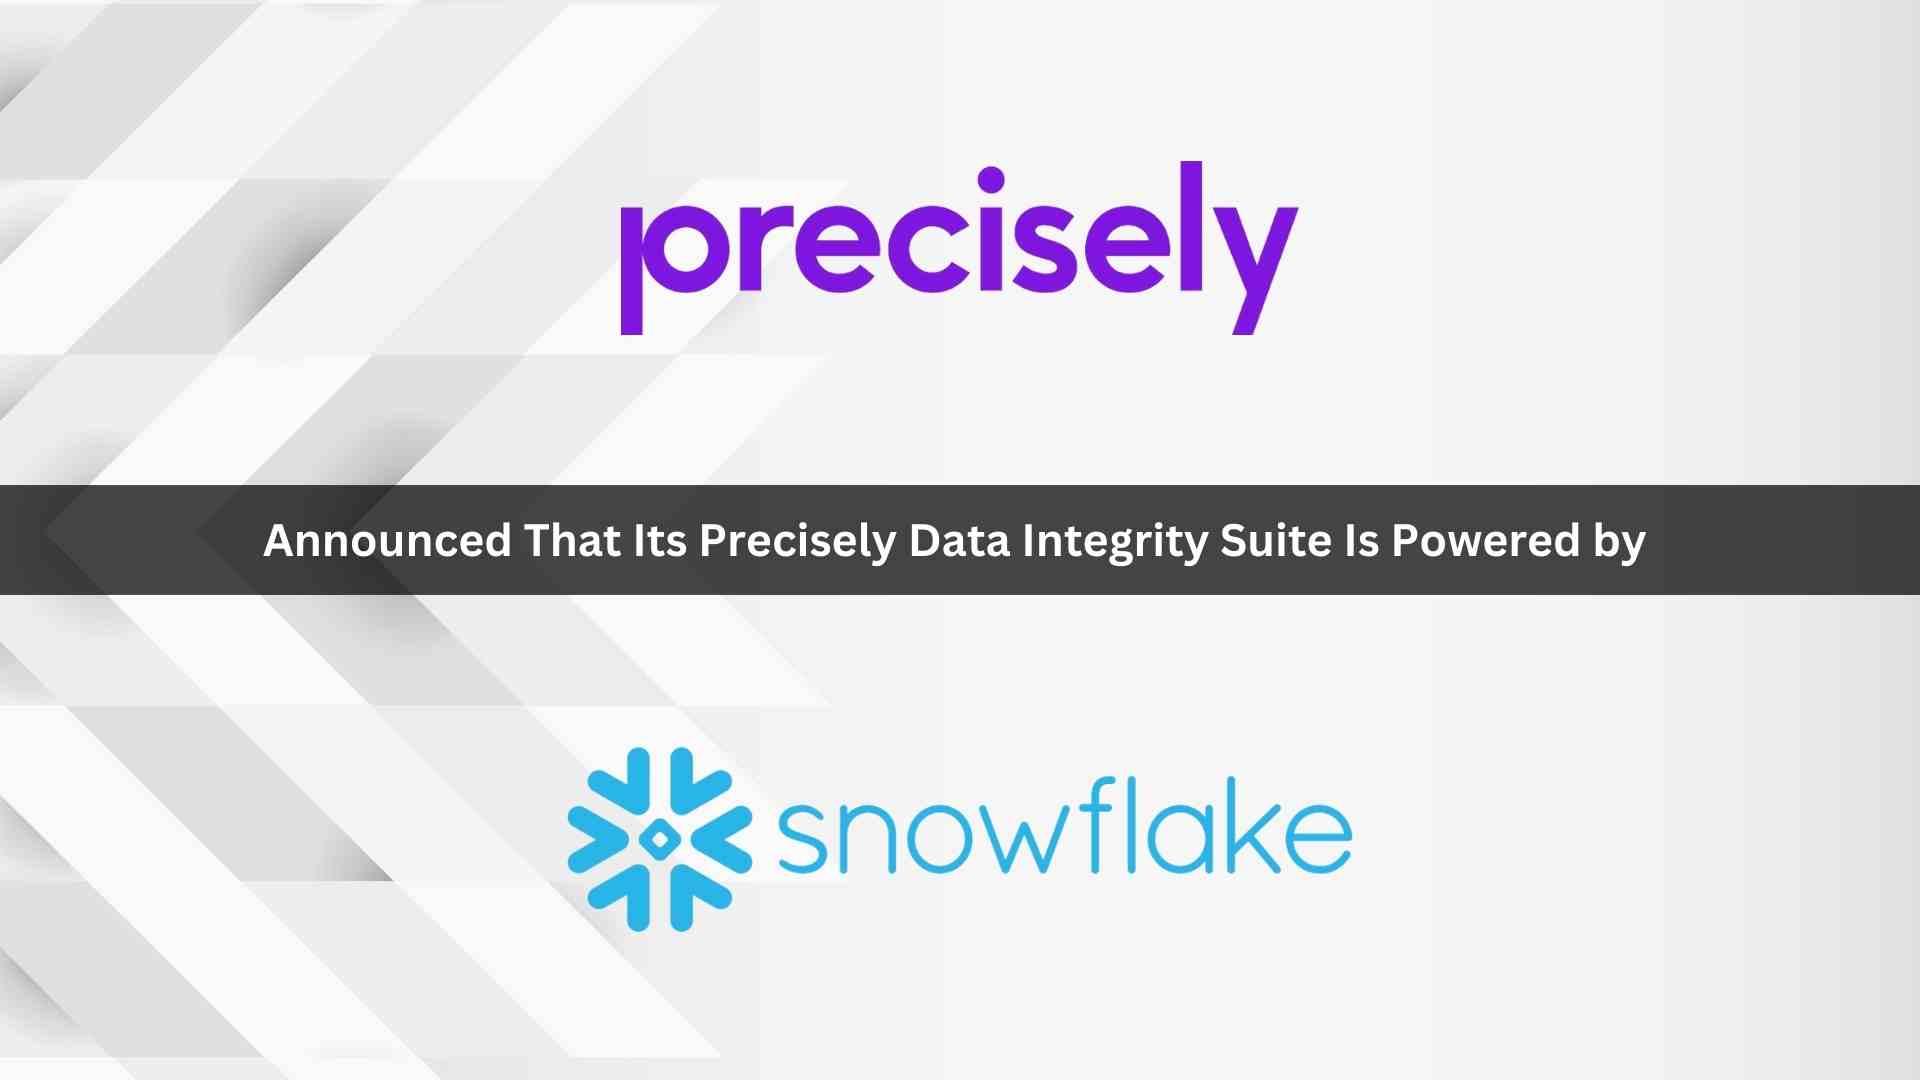 Precisely Data Integrity Suite is Now Powered by Snowflake